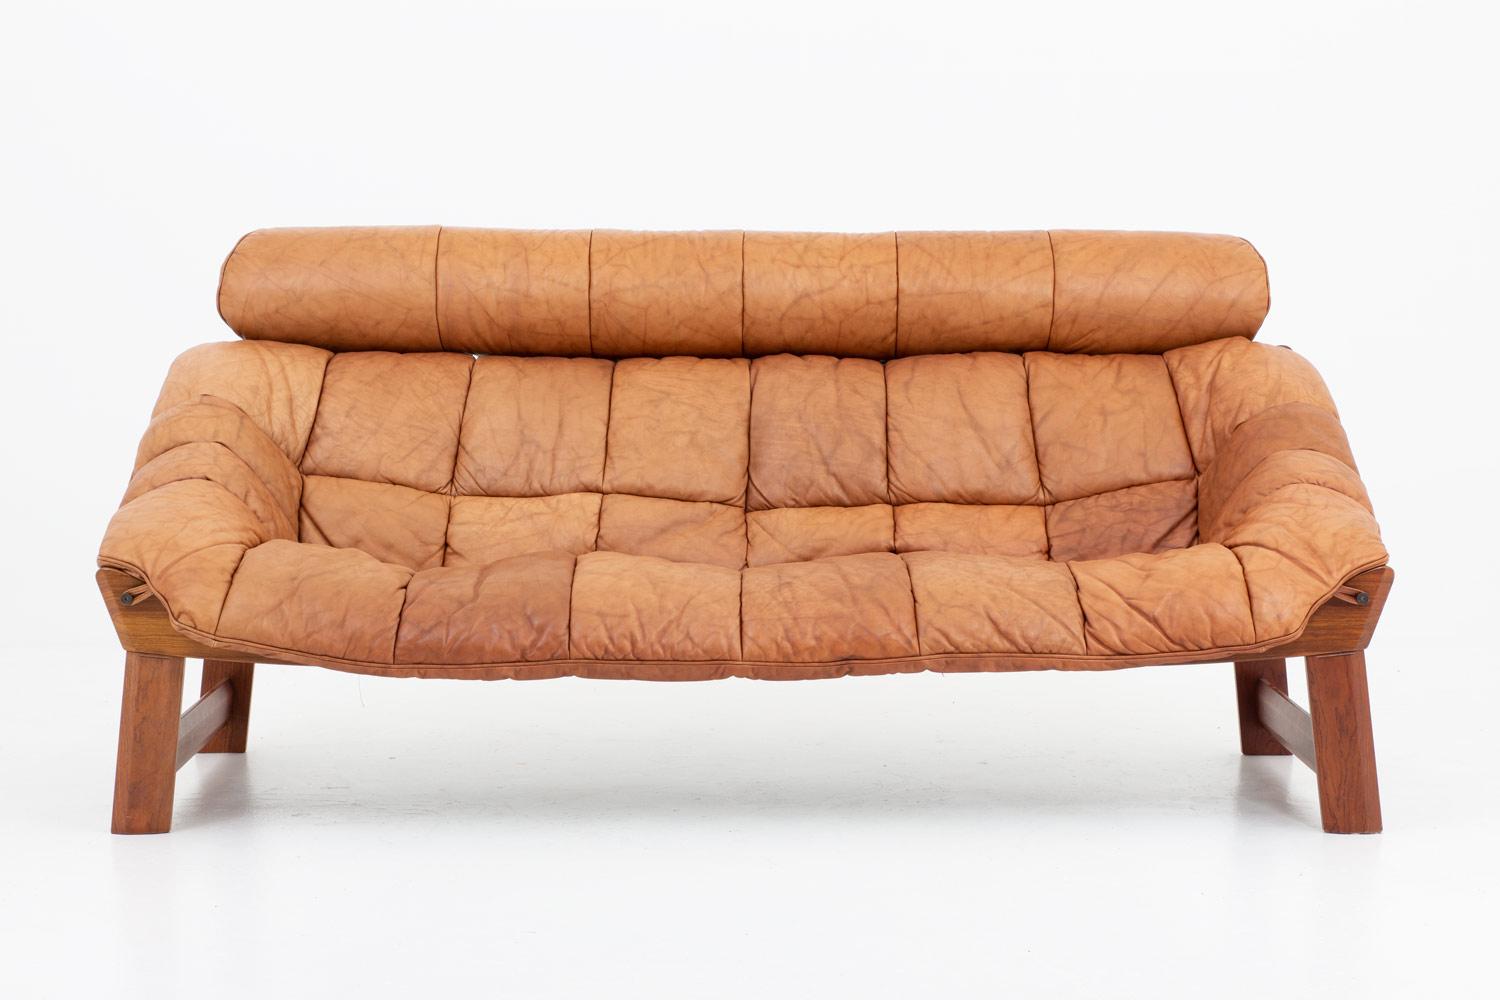 Mid-Century Modern Percival Lafér-Style Sofas and Lounge Chair in Cognac Leather